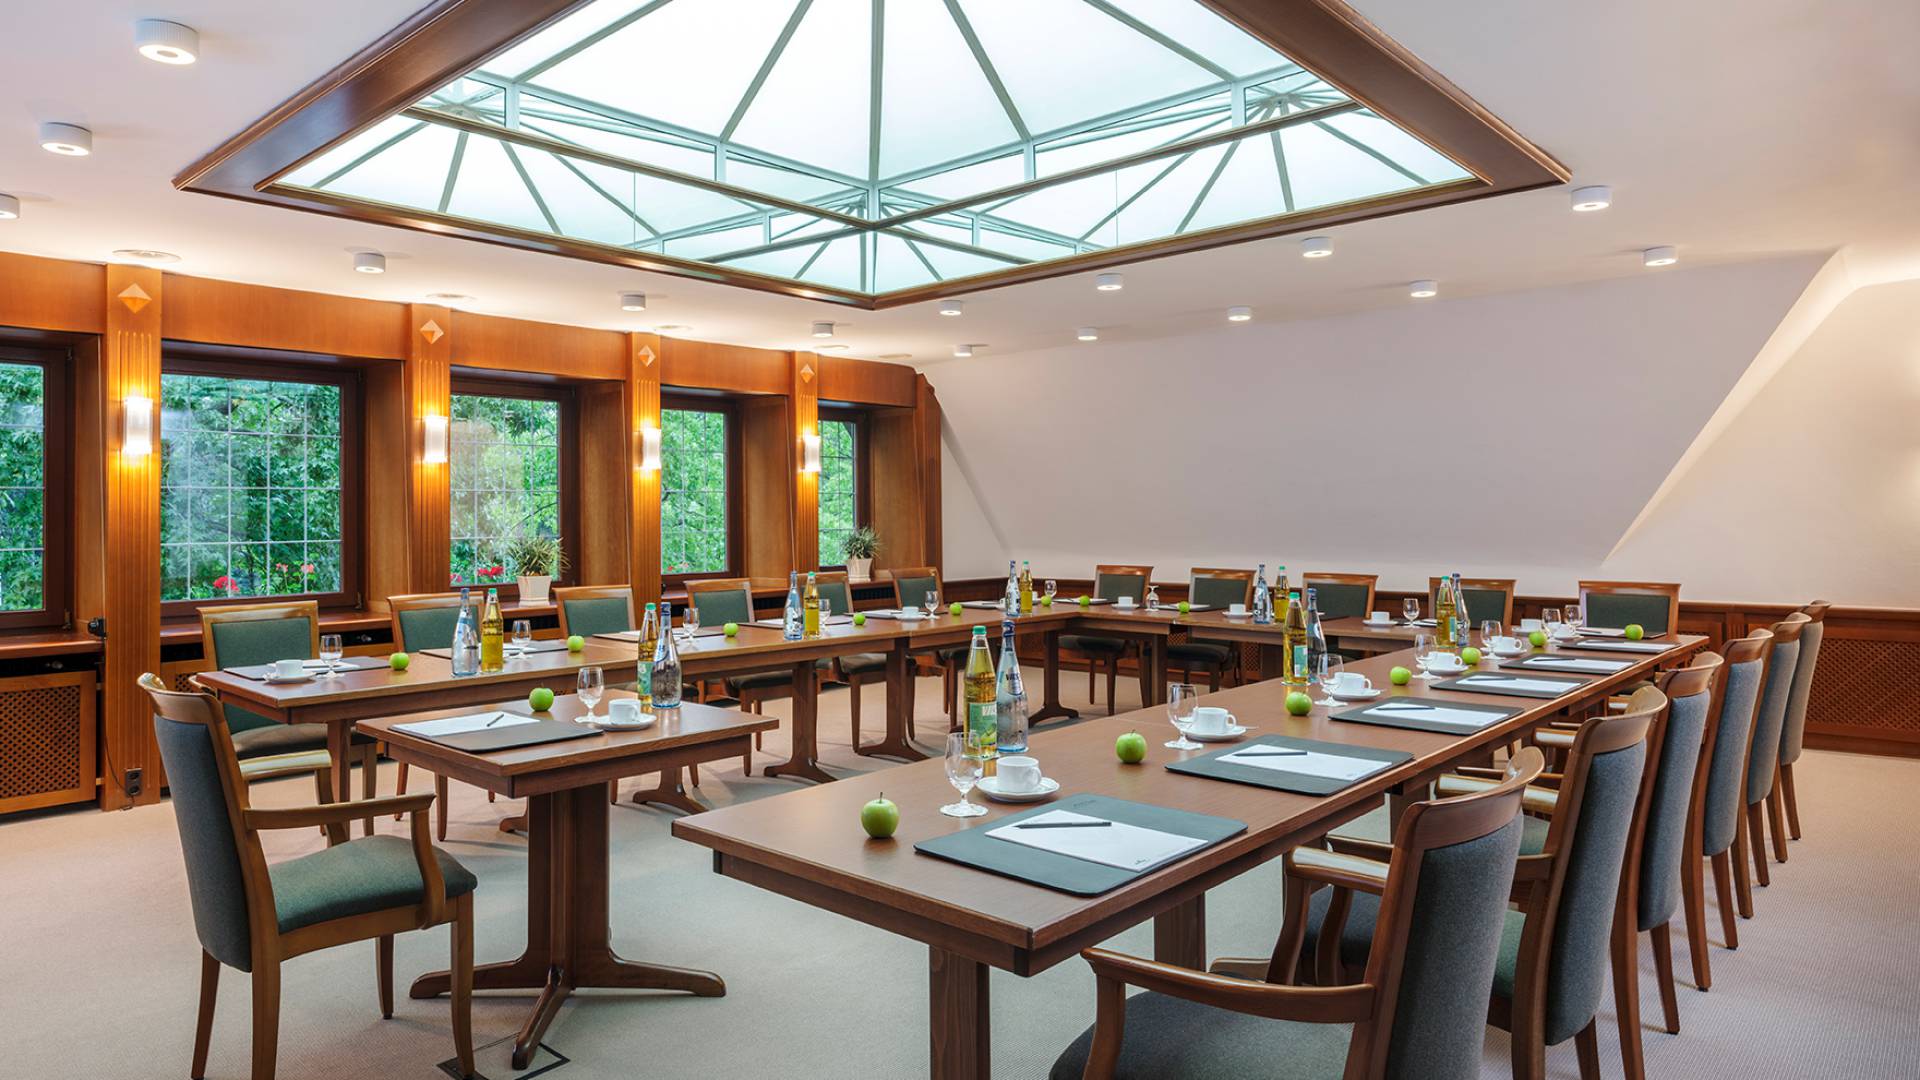 Conference room at the Jagdhaus Eiden